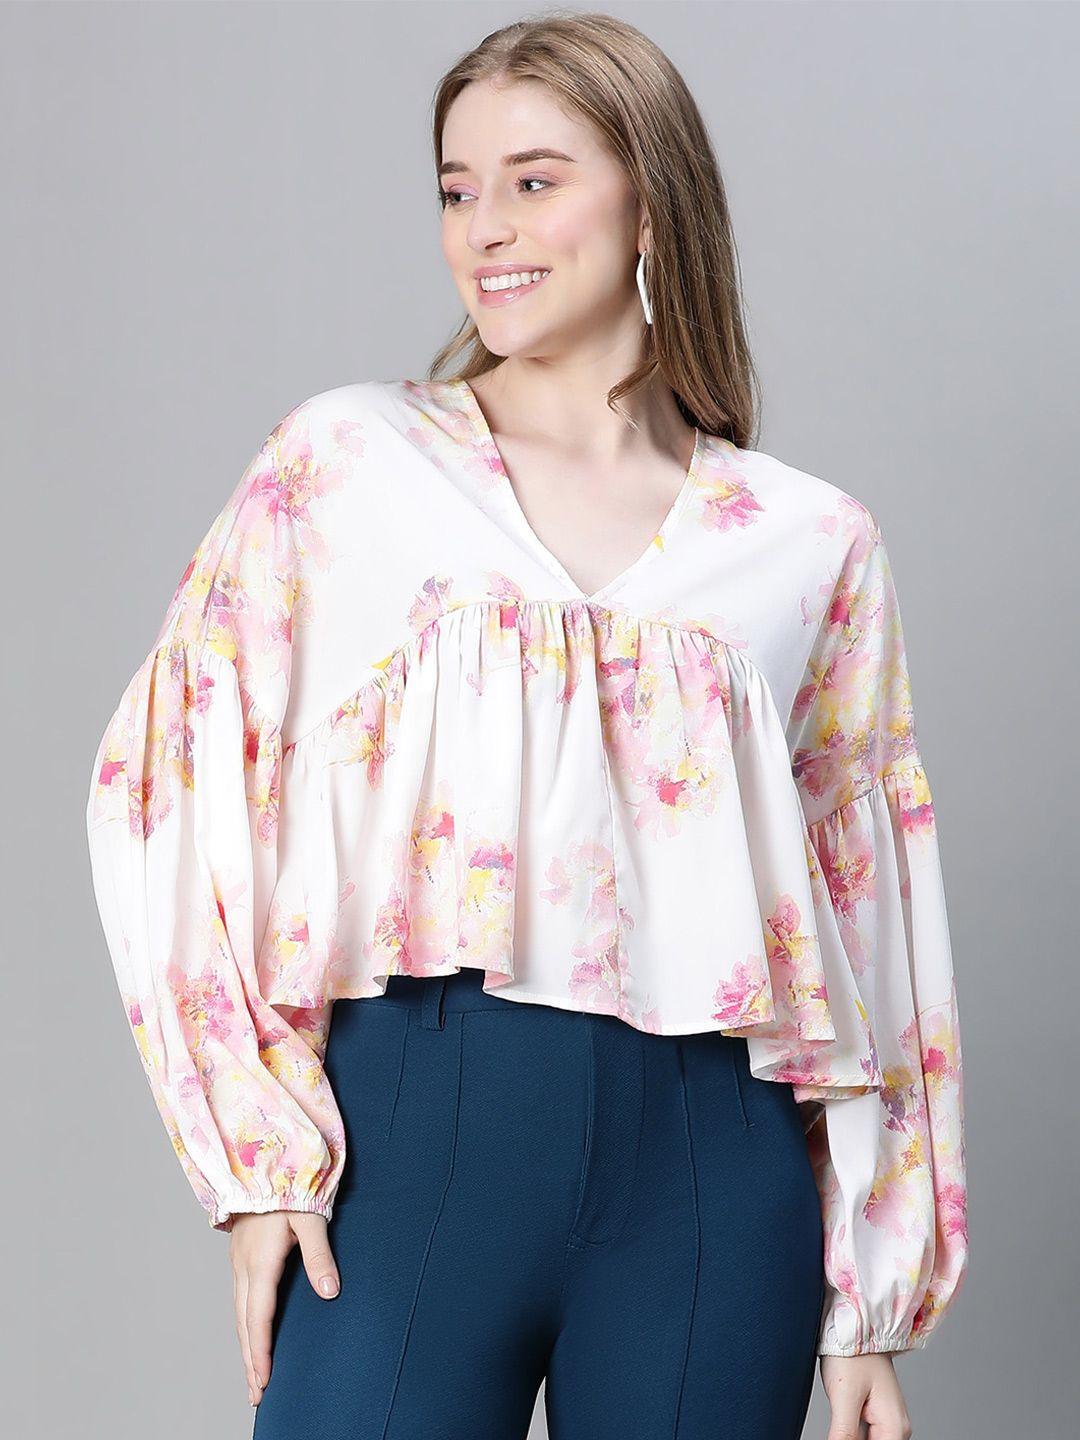 oxolloxo floral print extended sleeves empire top